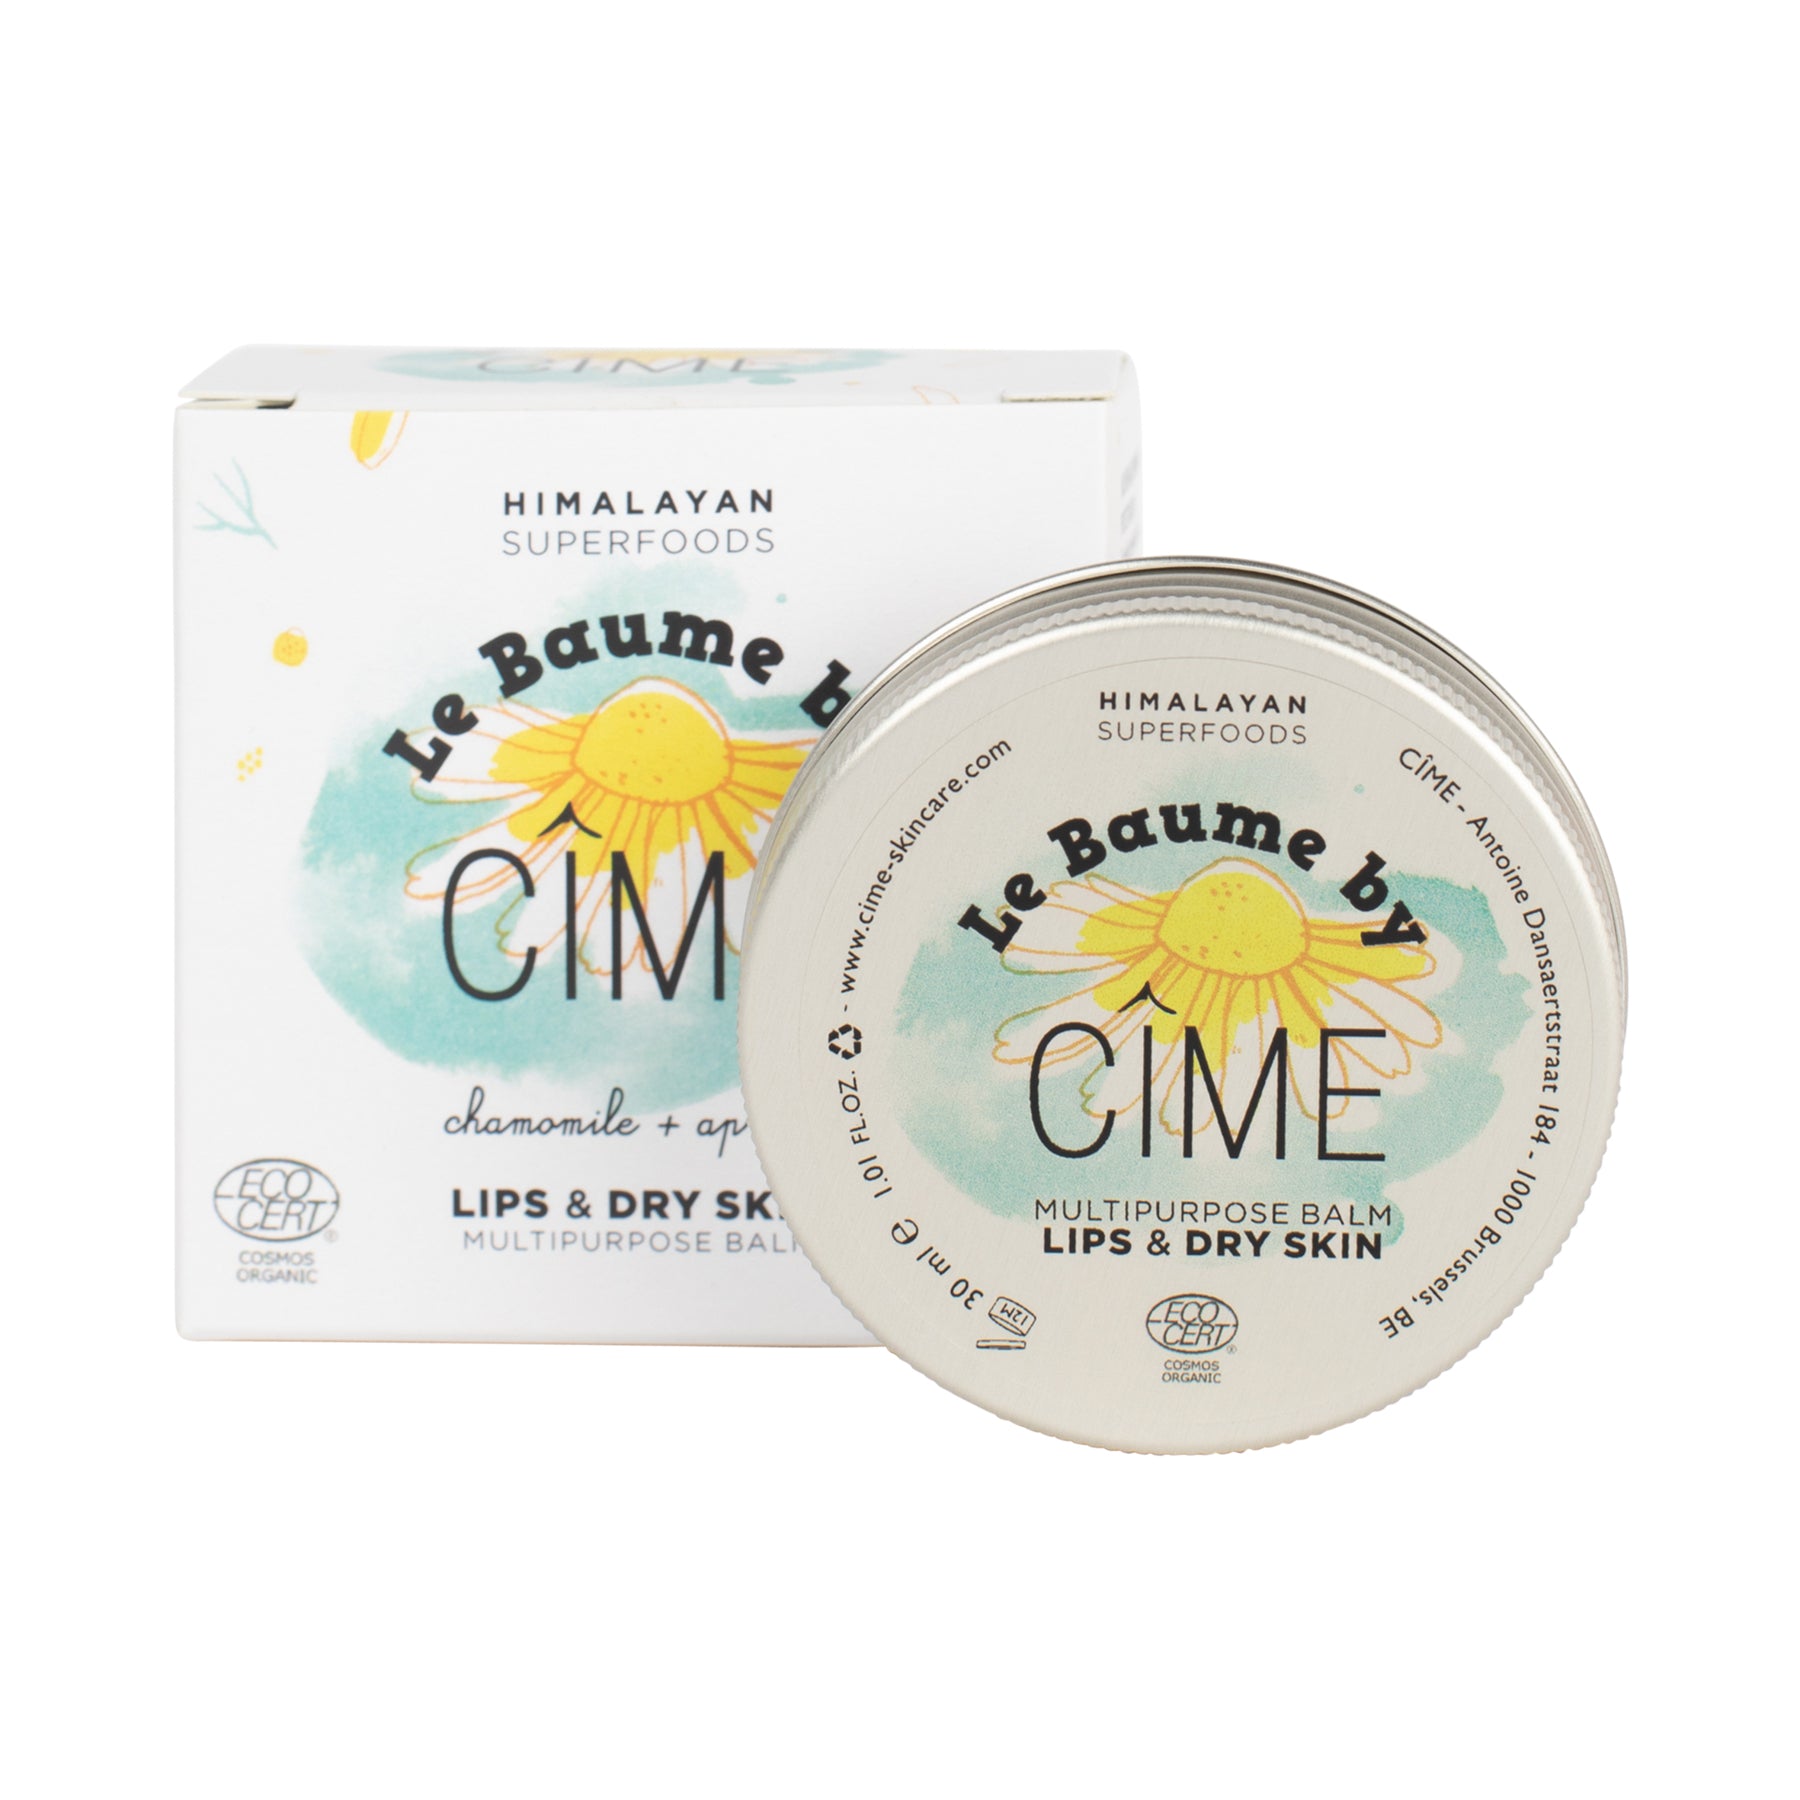 Le Baume by CÎME | Balm for lips & dry skin